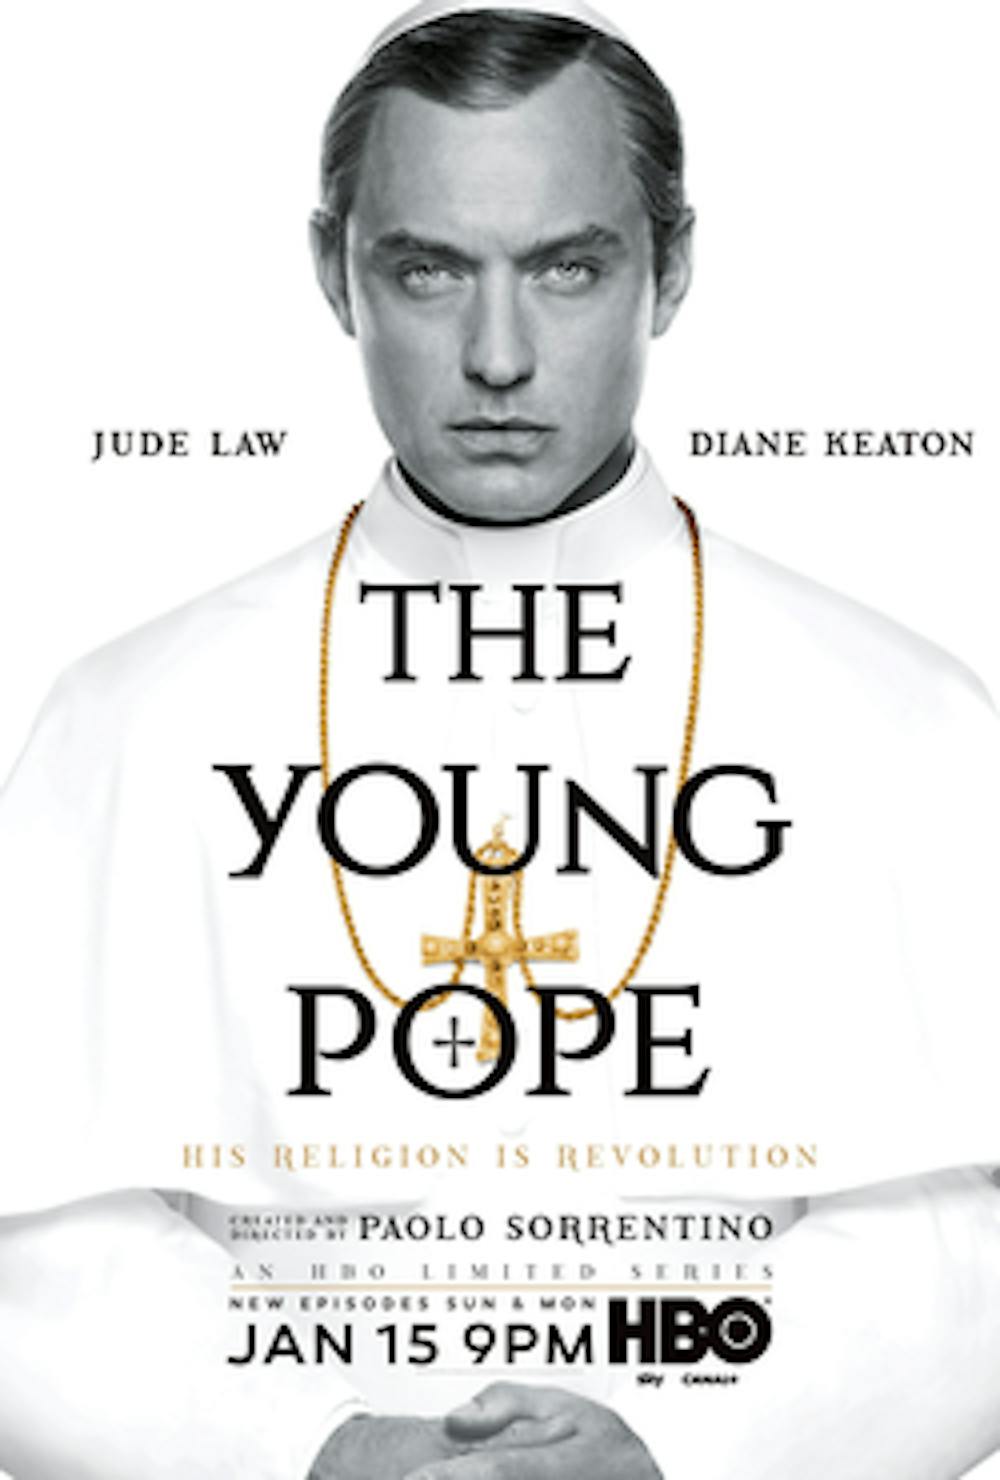 The Young Pope, episodes 6-10: Lenny becomes likeable